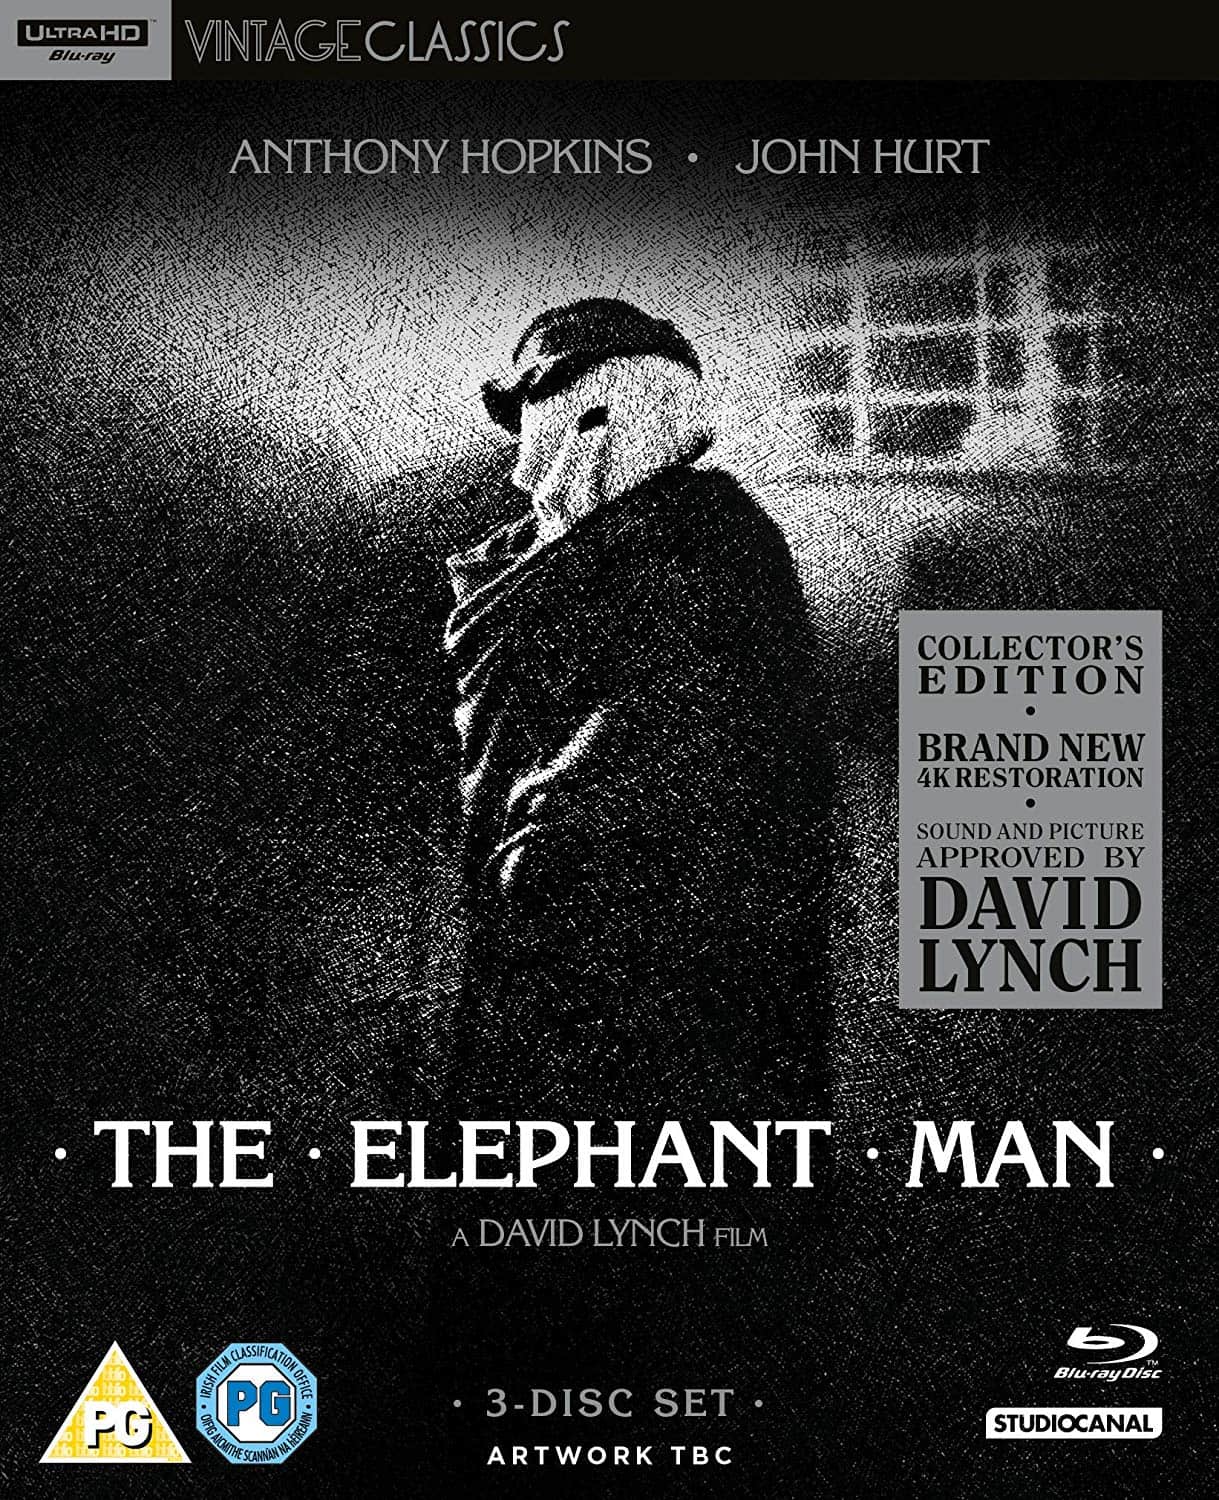 The Elephant Man 4k Collectors Edition